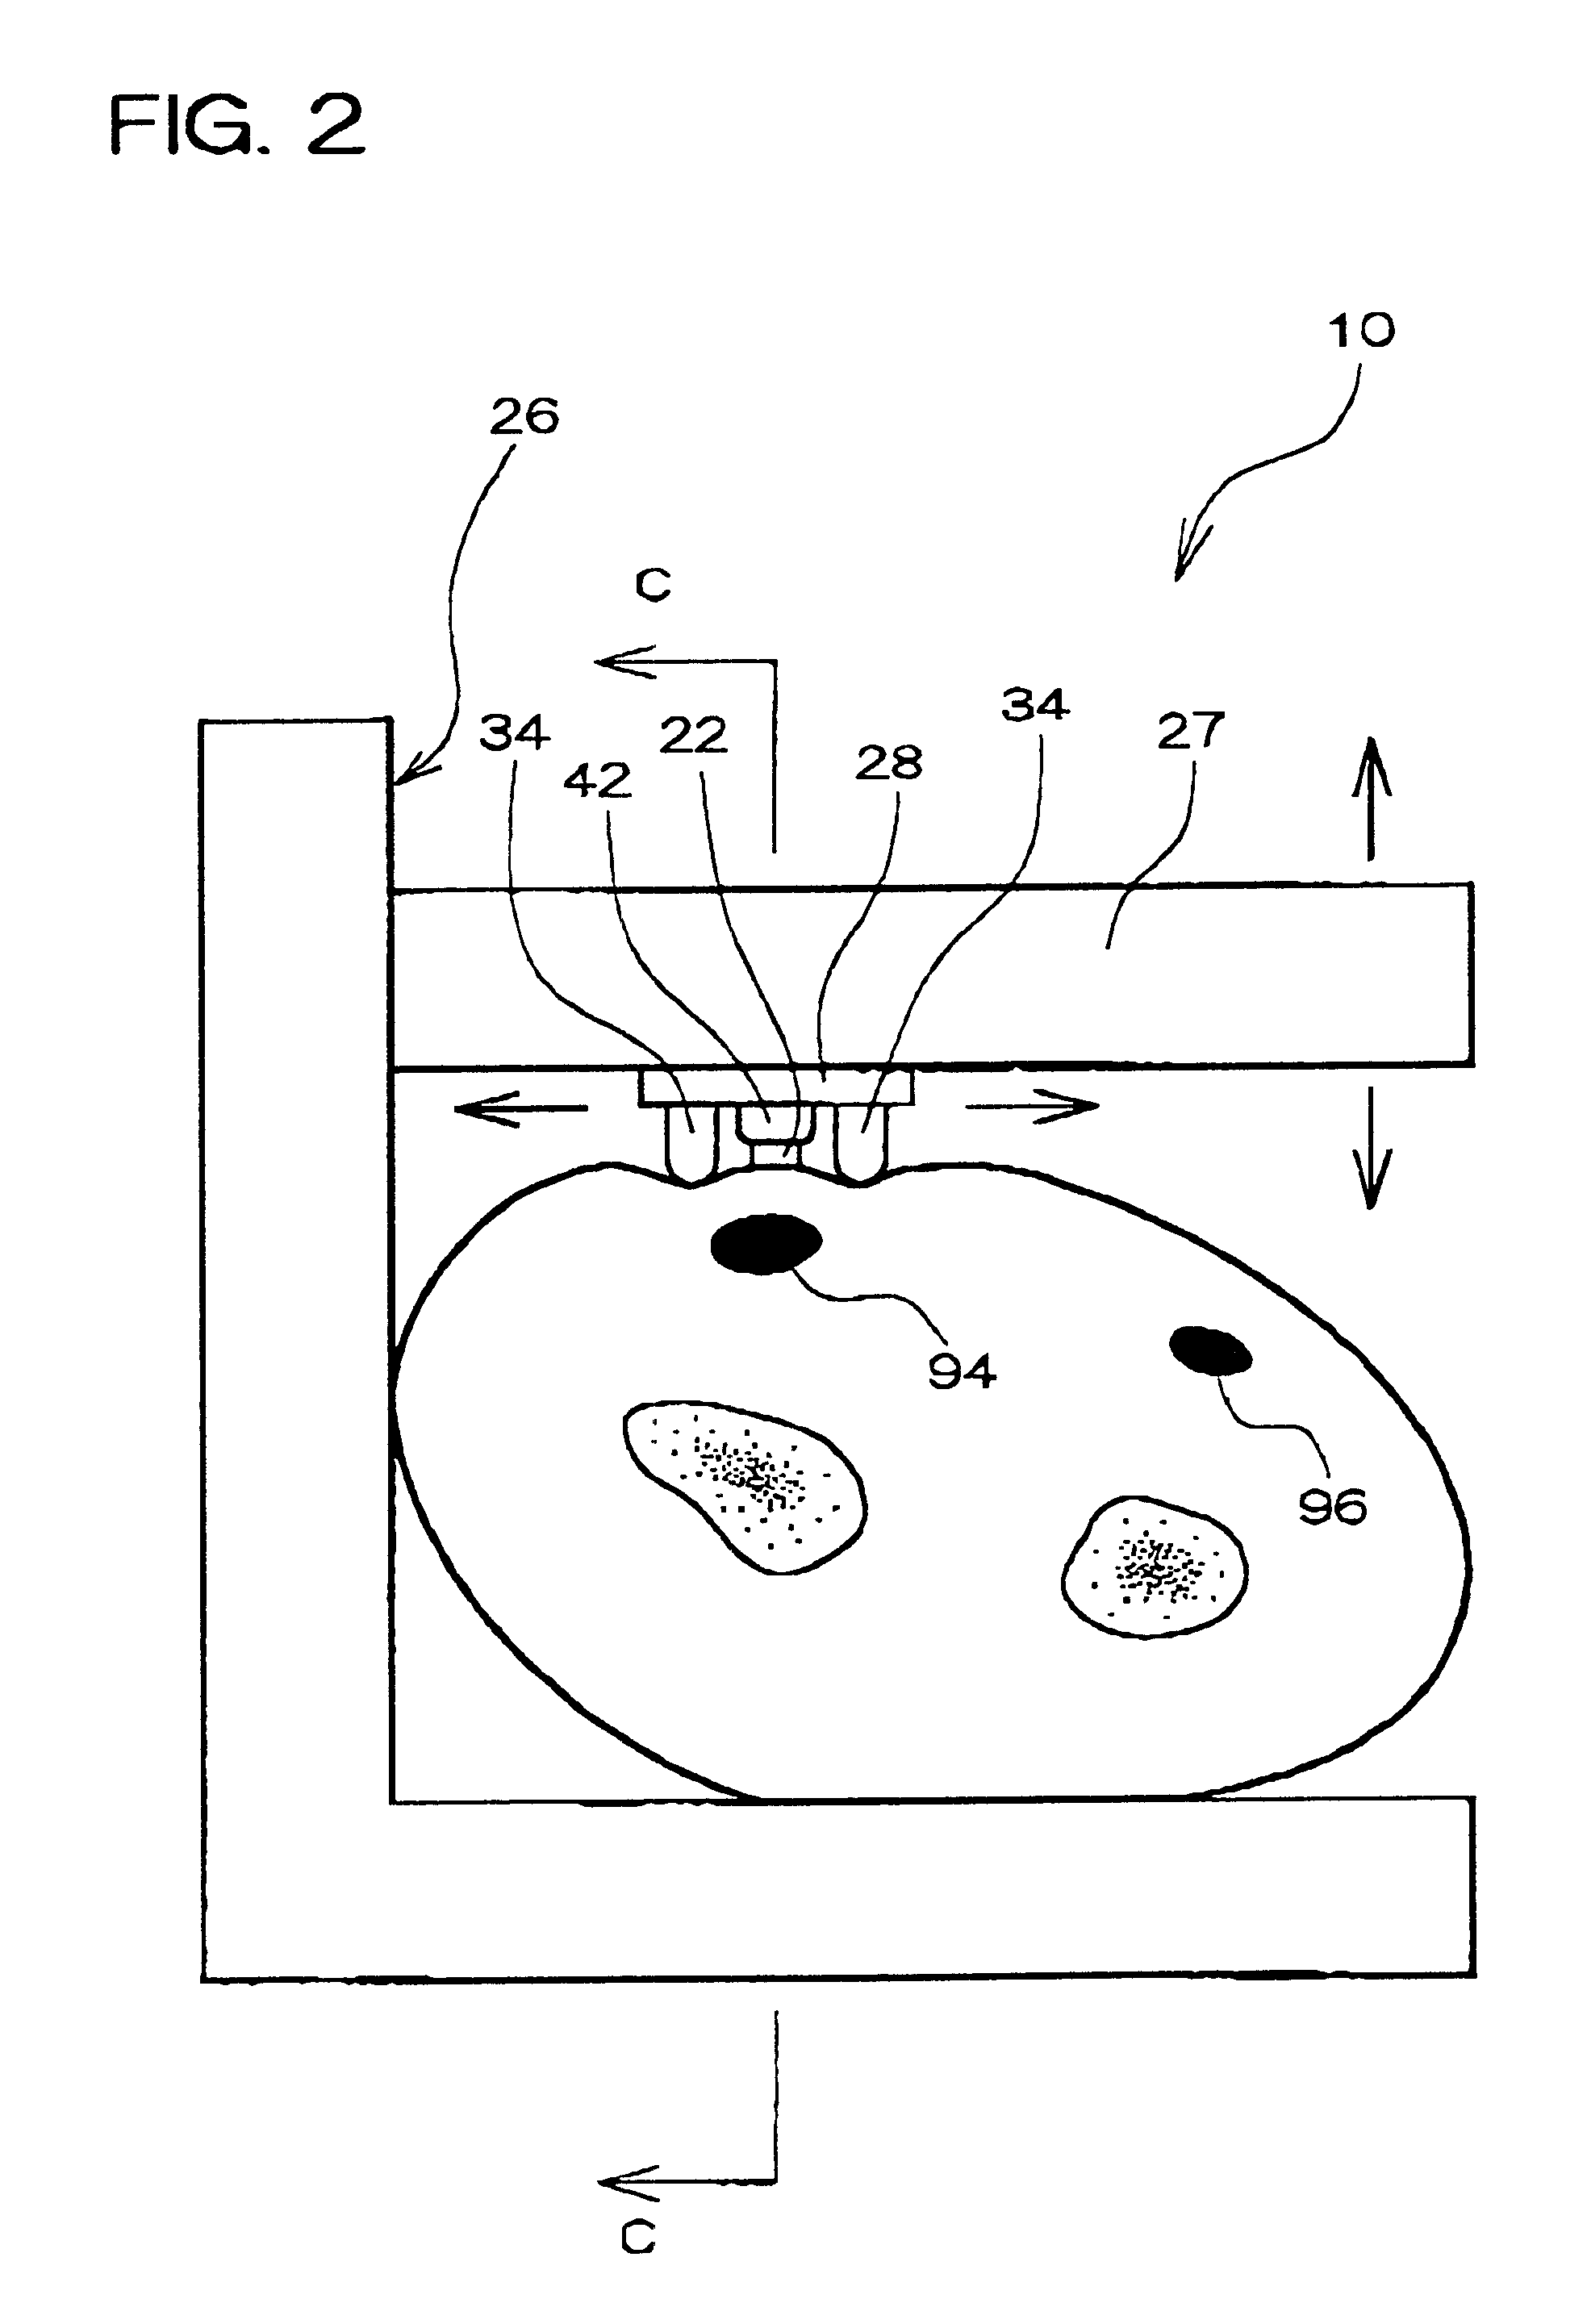 Blood pressure monitor and pulse wave detection apparatus